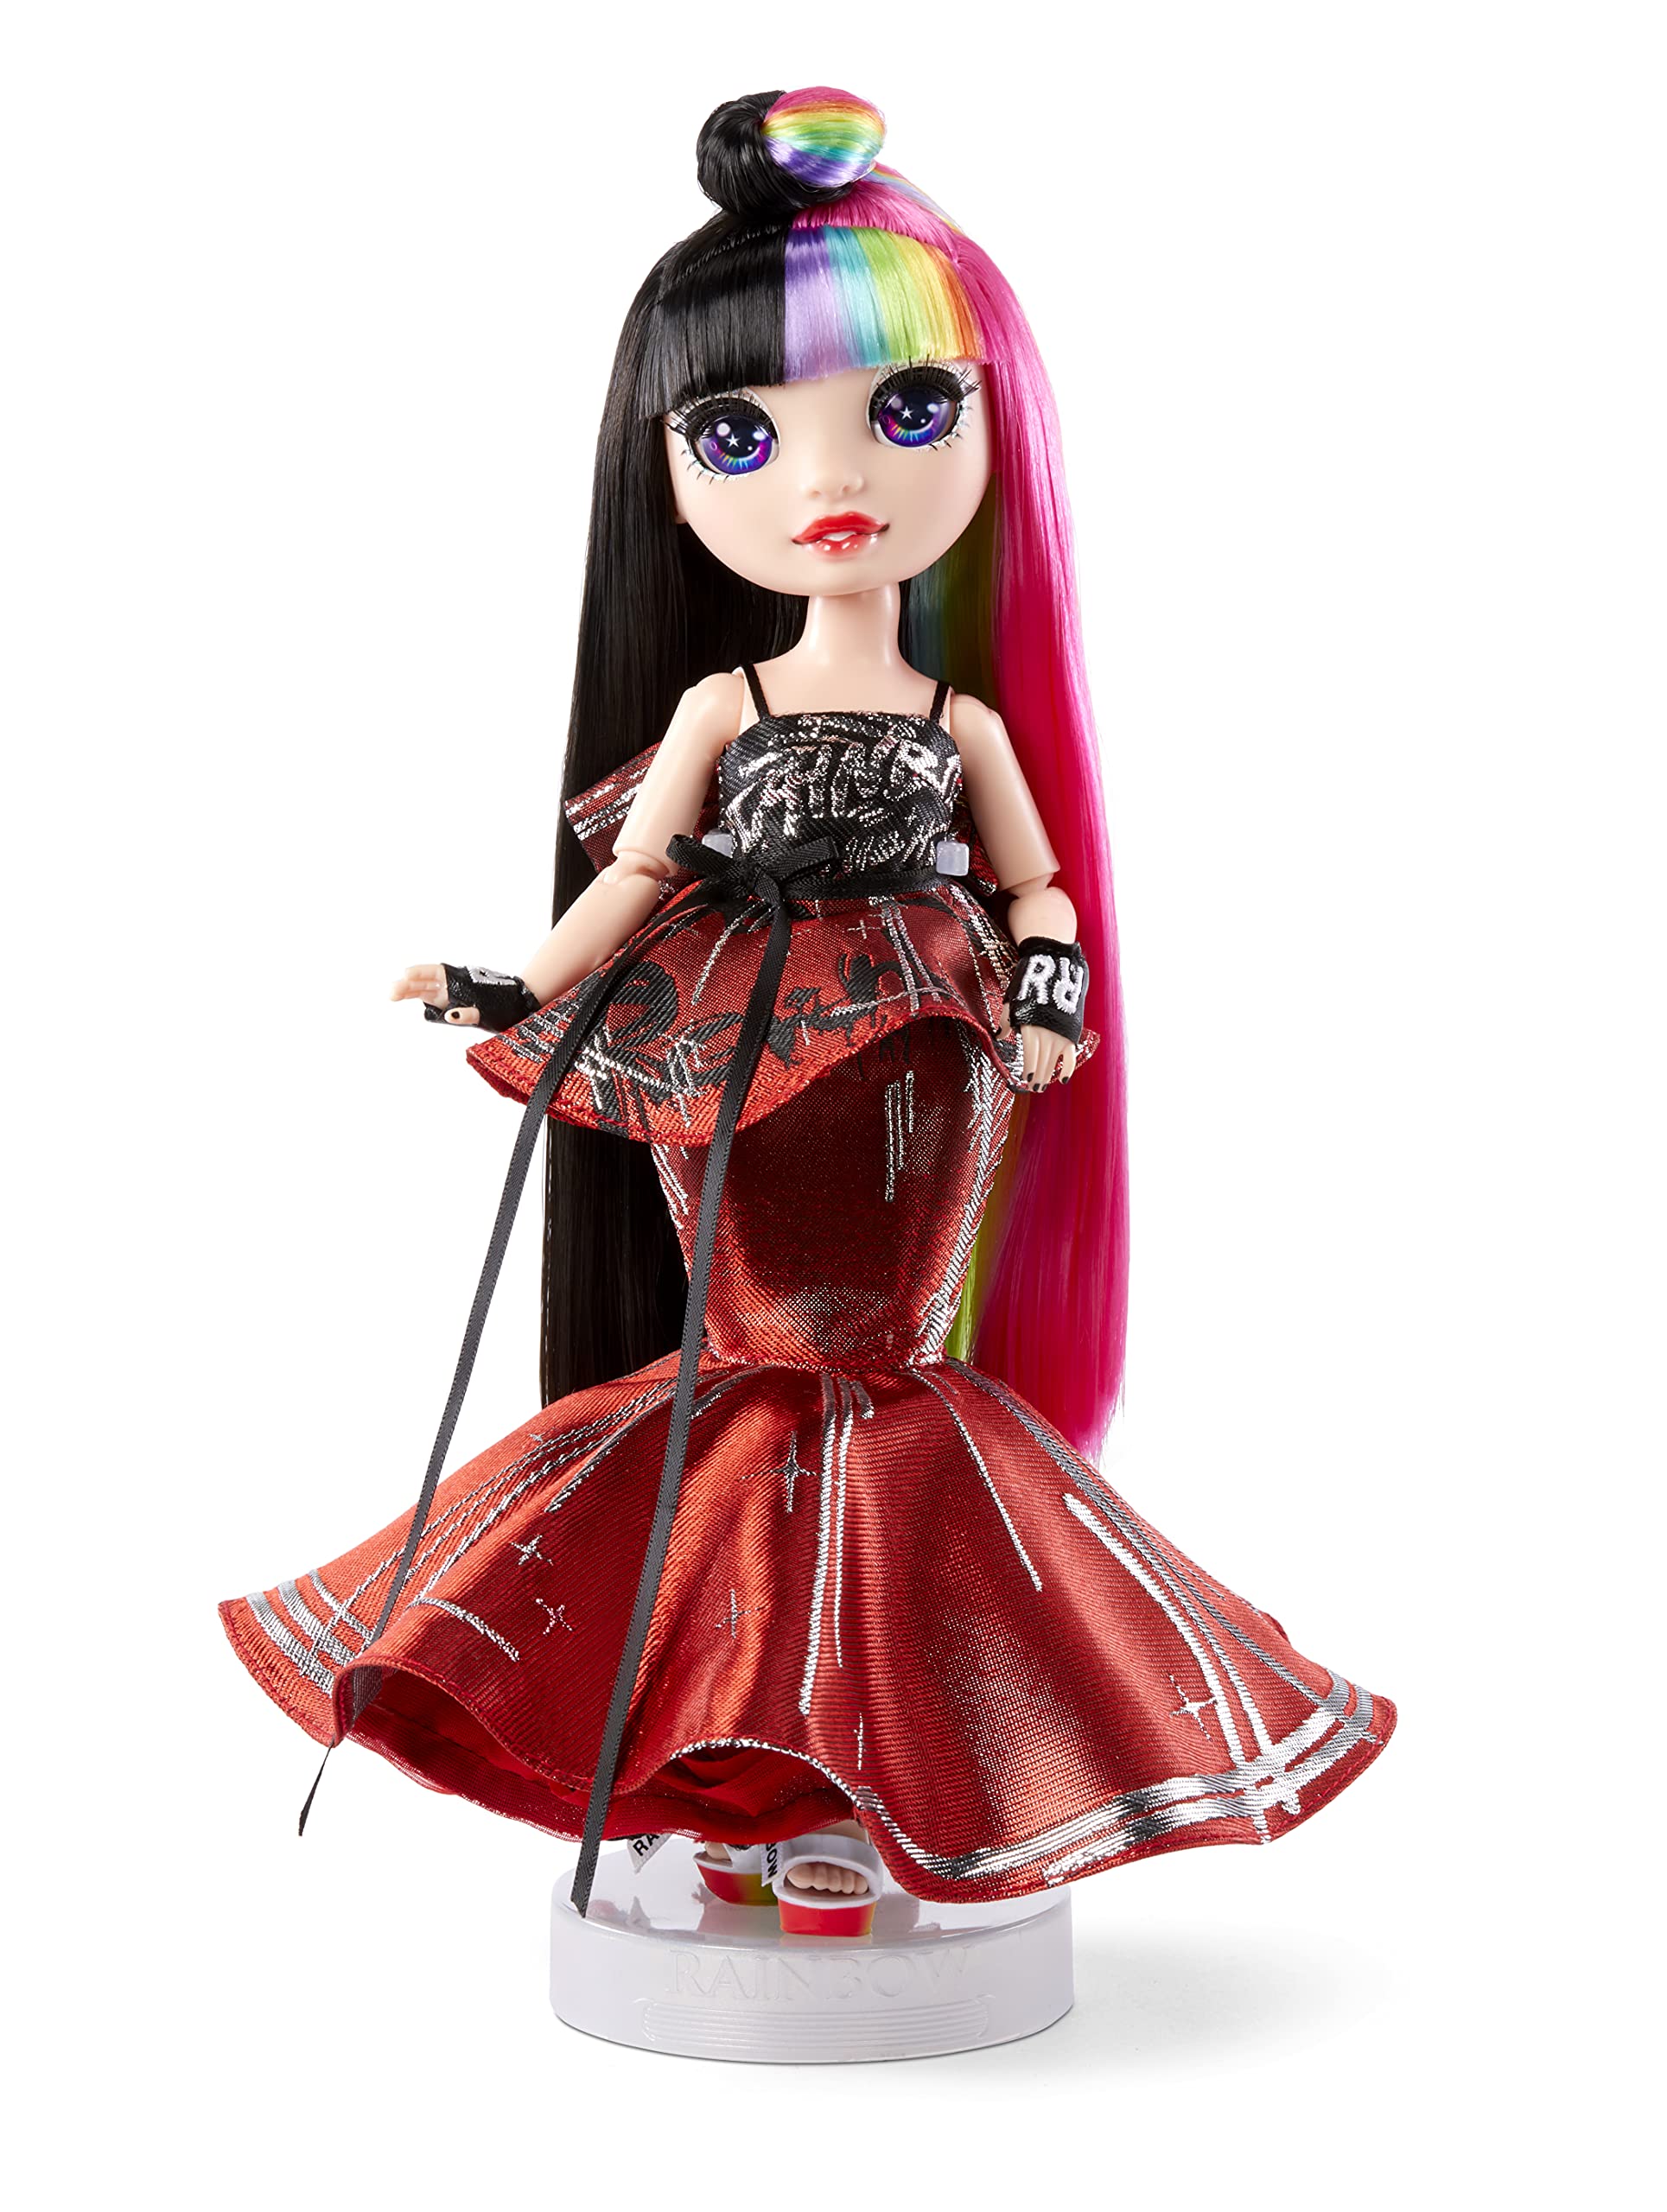 Rainbow High 2021 Jett Dawson Collector Fashion Doll with Black and Rainbow Hair, 2 Designer Outfits to Mix & Match Accessories, Gift for Kids & Collectors, Toys for Kids Ages 6 7 8+ to 12 Years